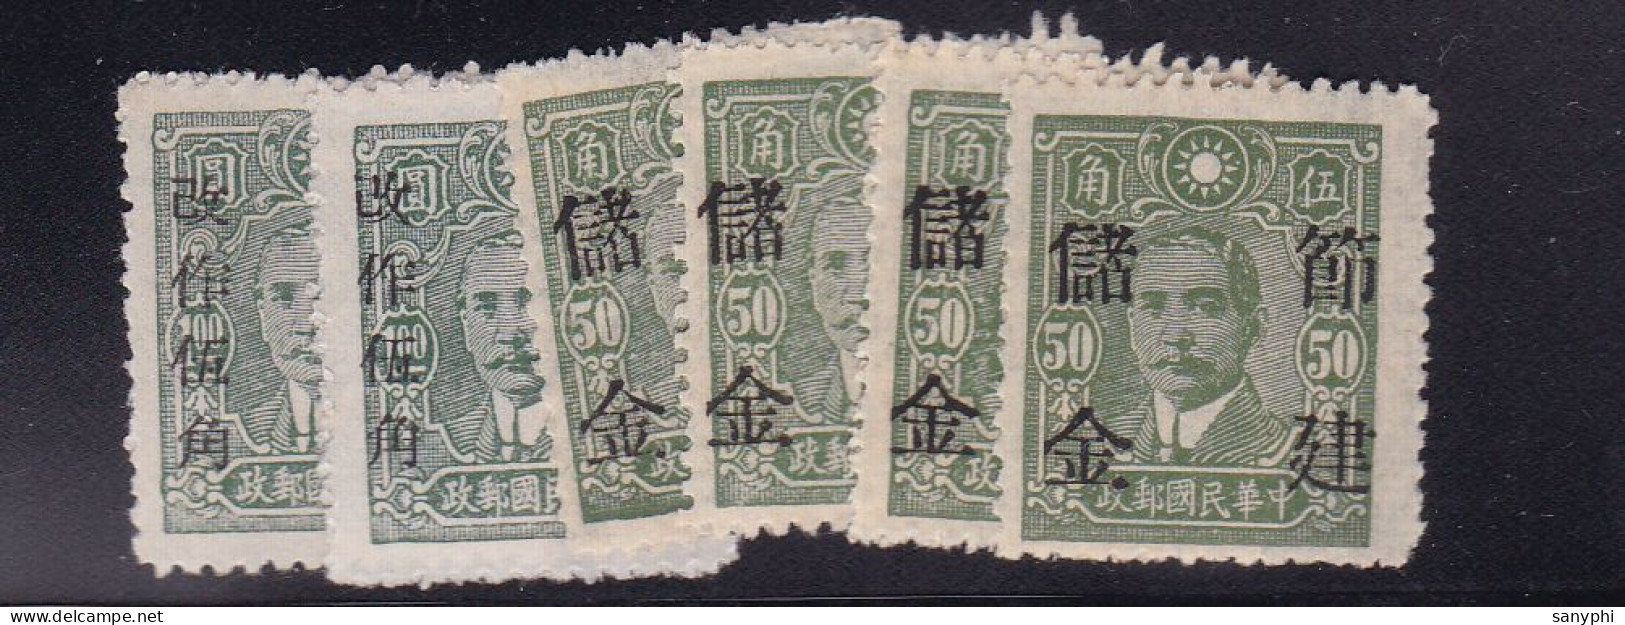 RO China Chine Various Dr Sun Ovpt "postal Savings Issue" ML - 1912-1949 Republic